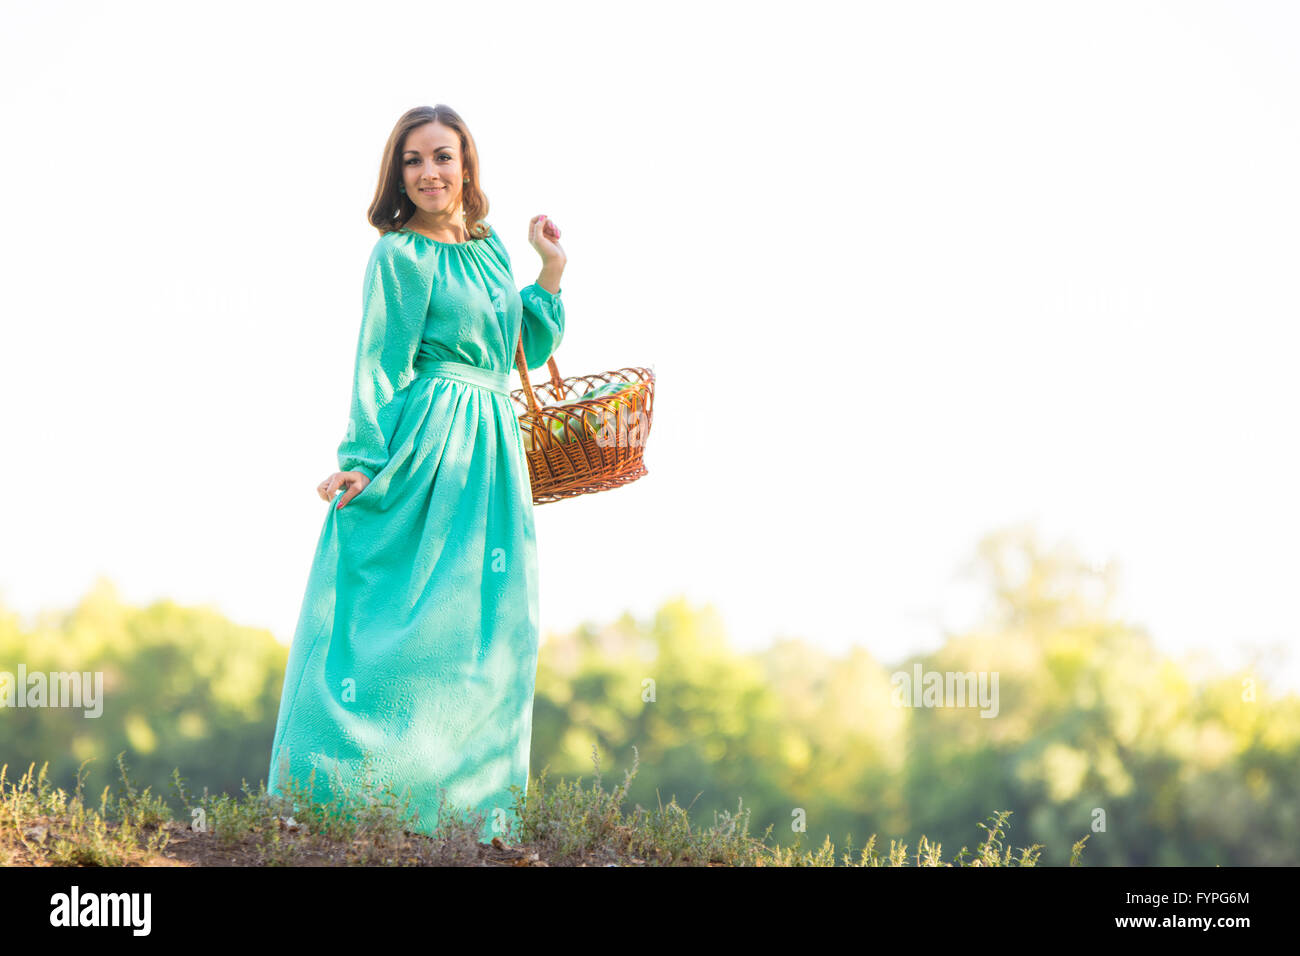 The girl with a basket in a long dress standing on the hill Stock Photo